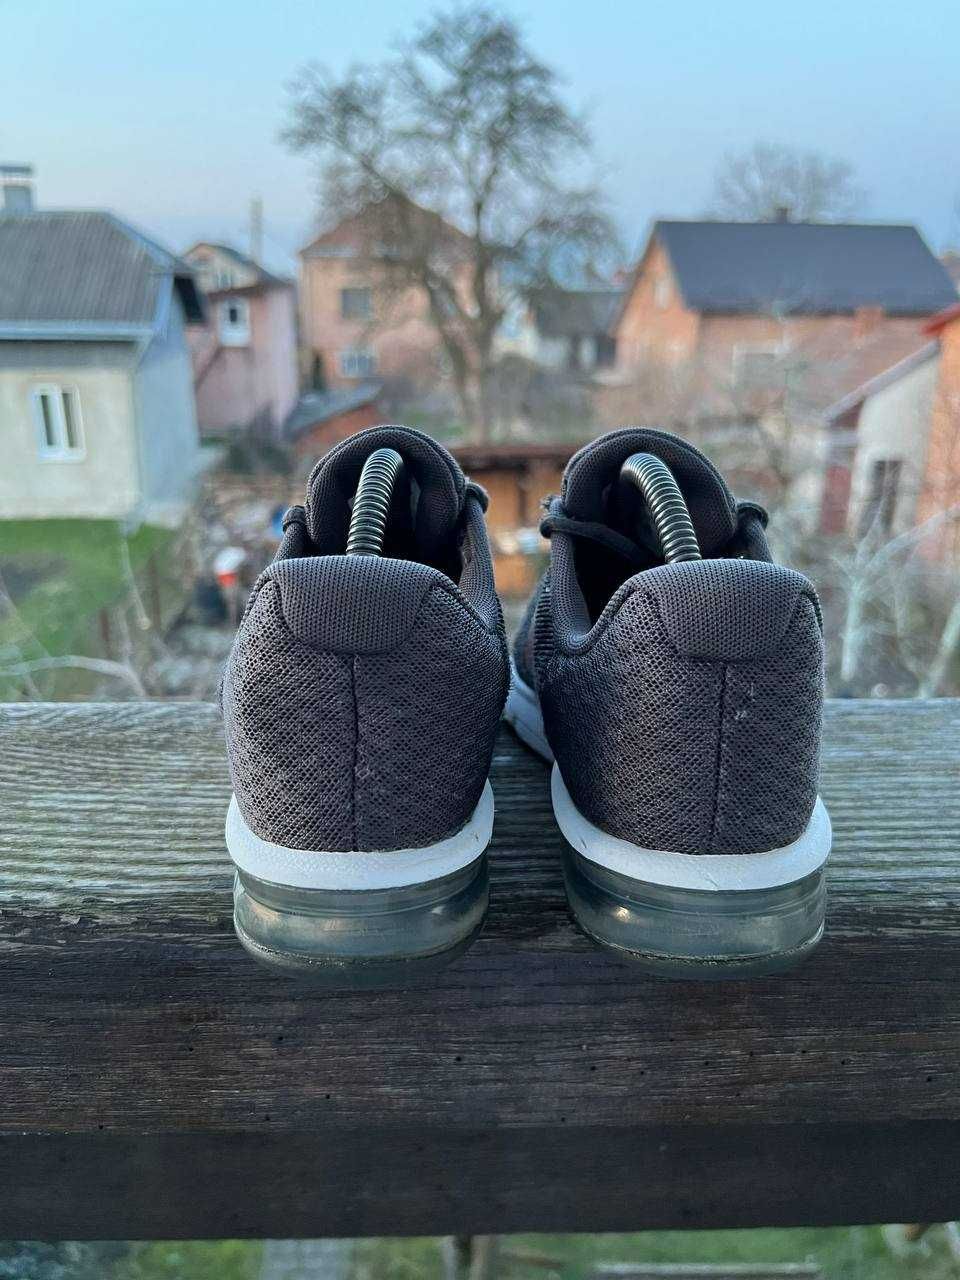 Кросівки Nike Air Max Sequent 2